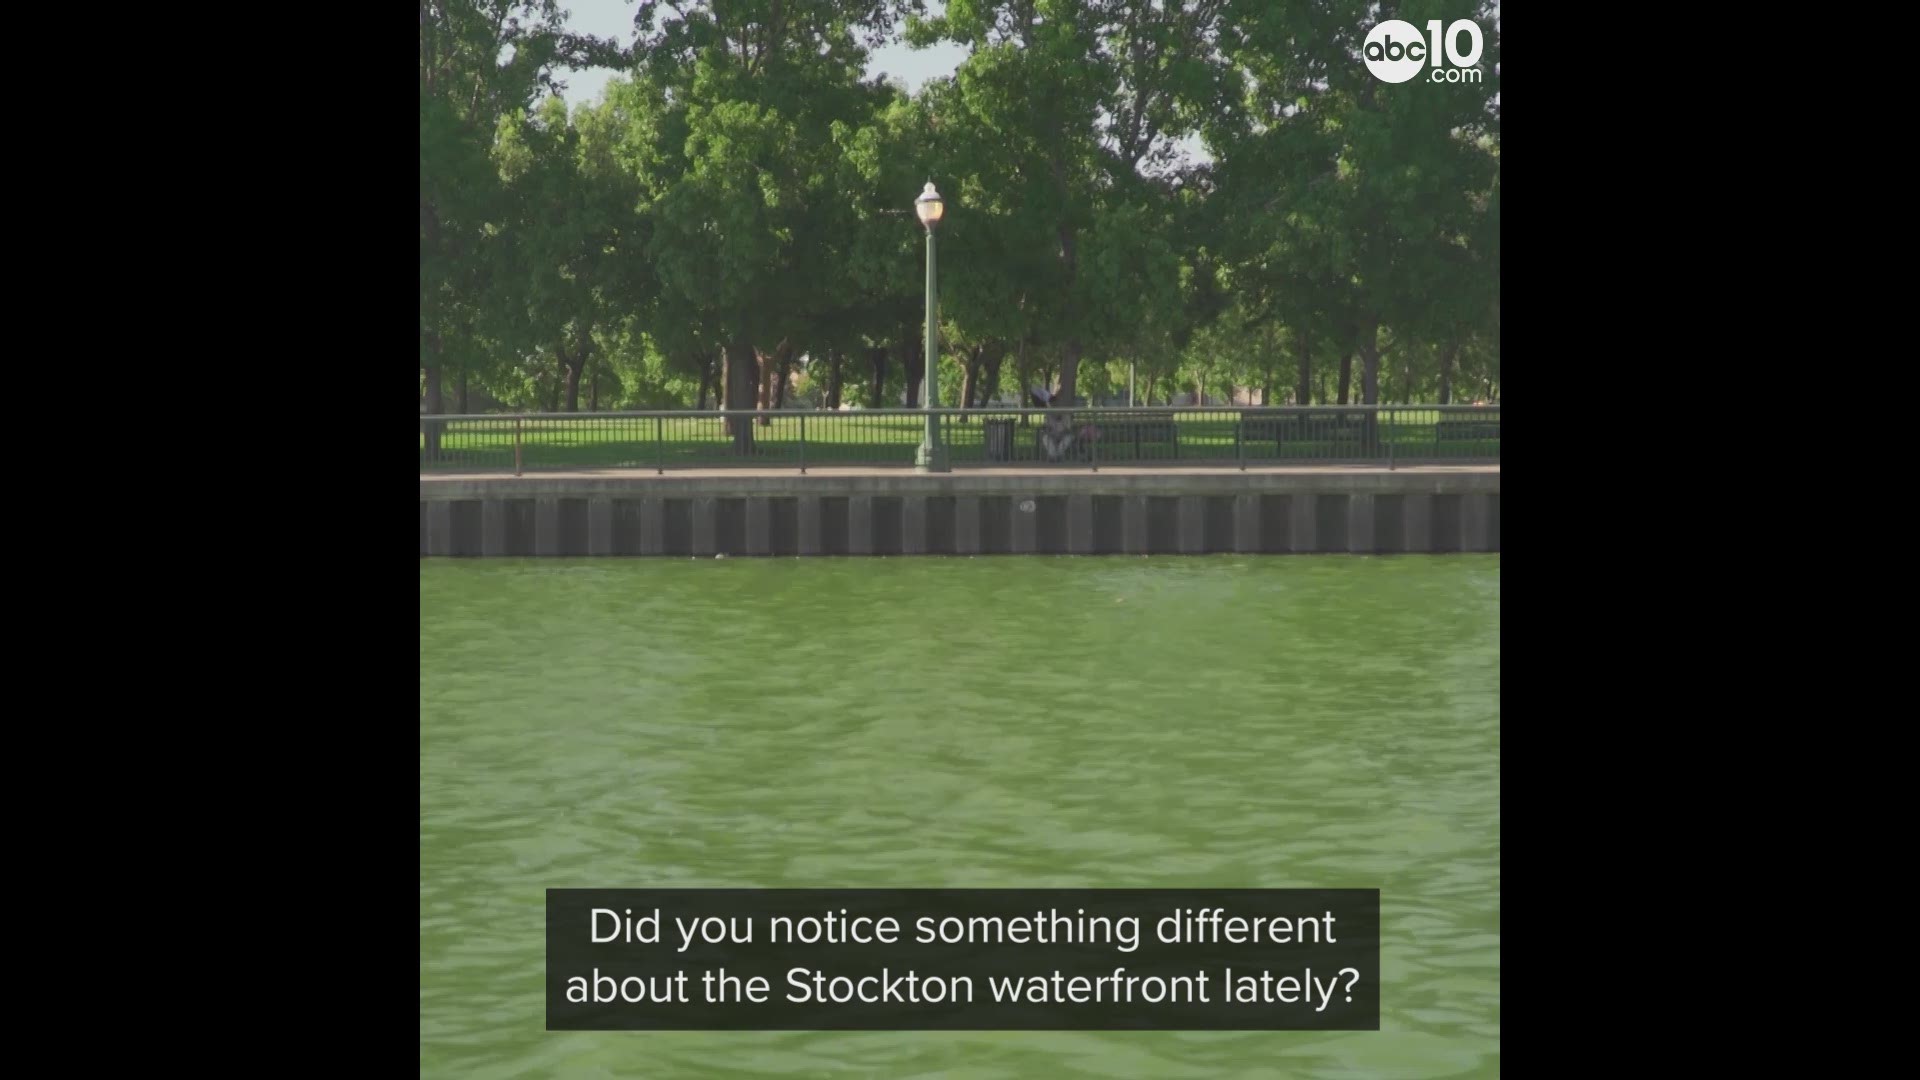 The Stockton Waterfront is turning green and people are wondering why. Our reporters found the answer.